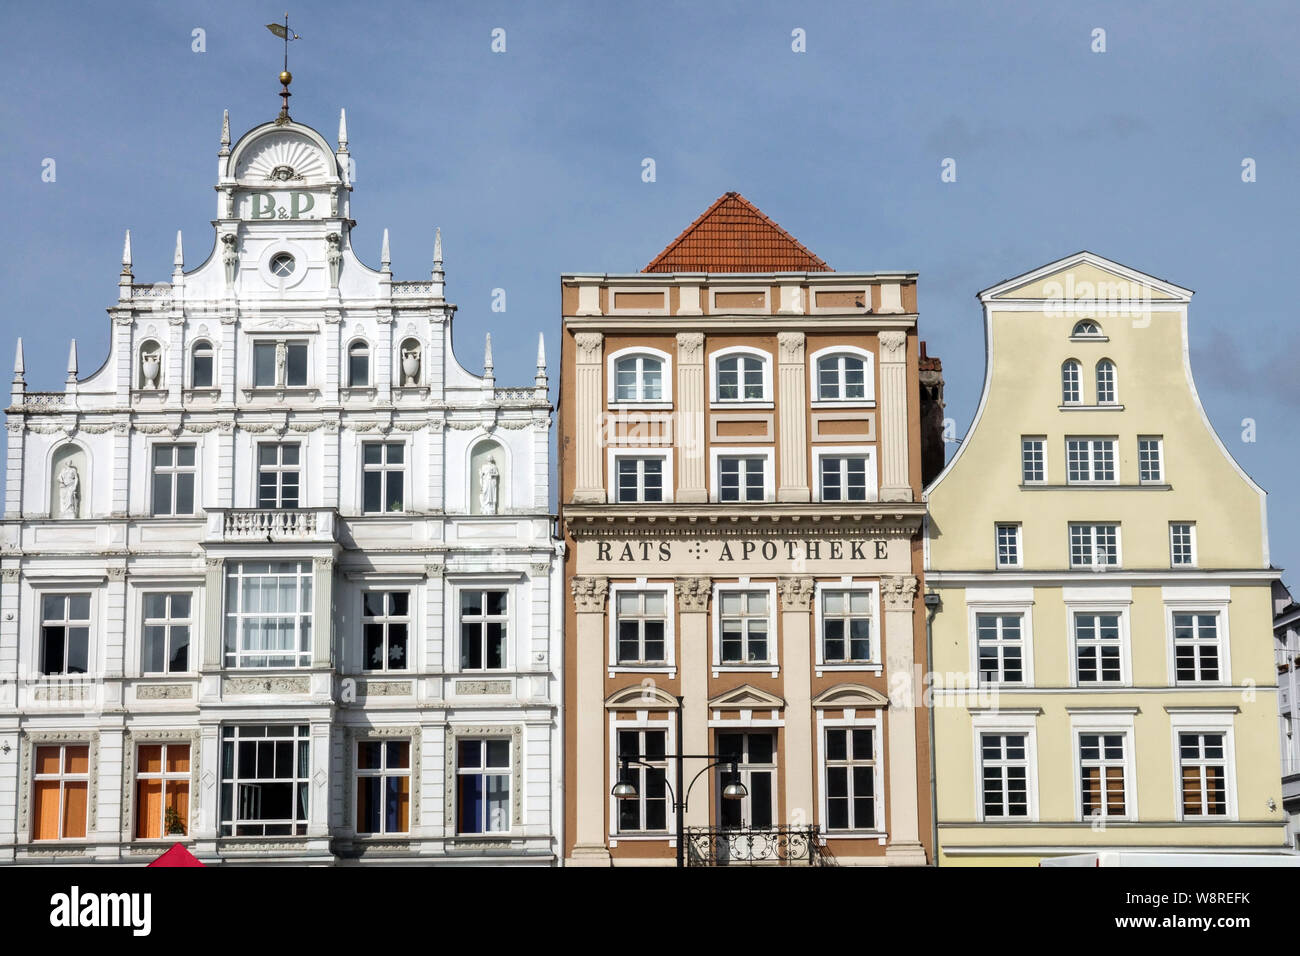 Germany Rostock, Old historic gabled houses on Main Square Stock Photo